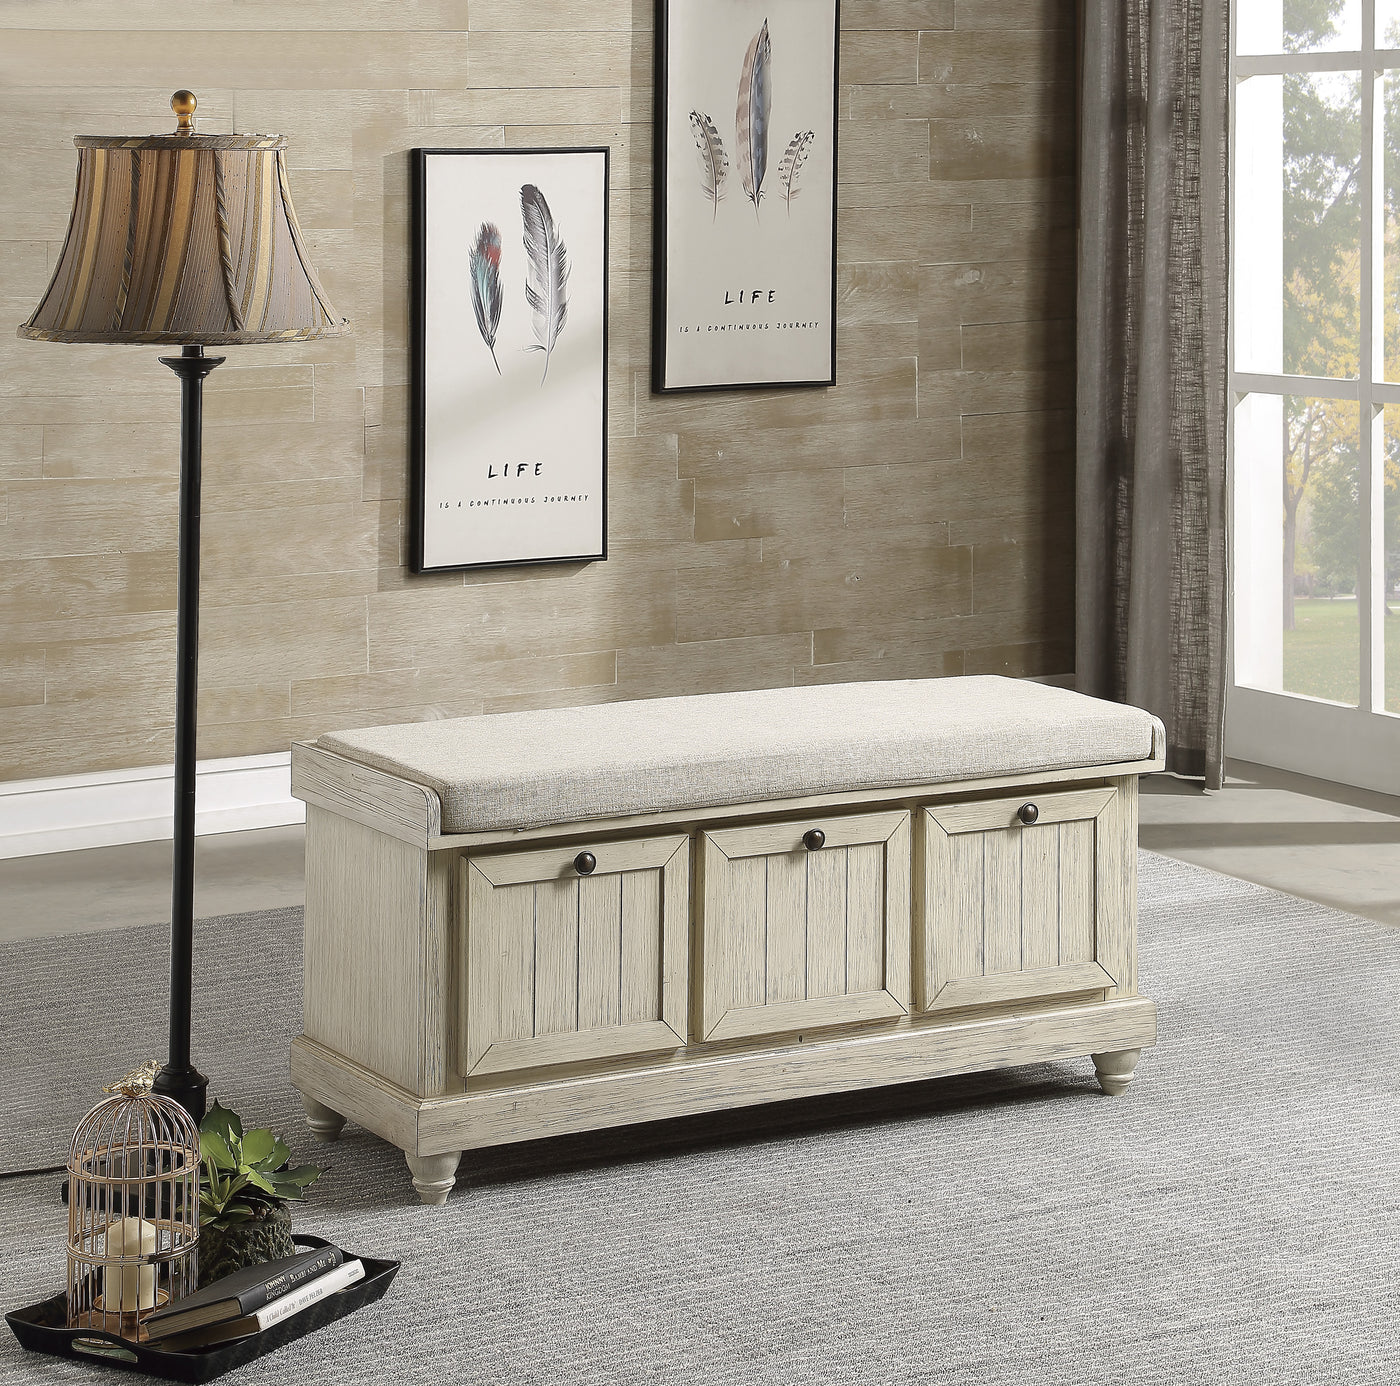 Woodwell Storage Bench - Antique White